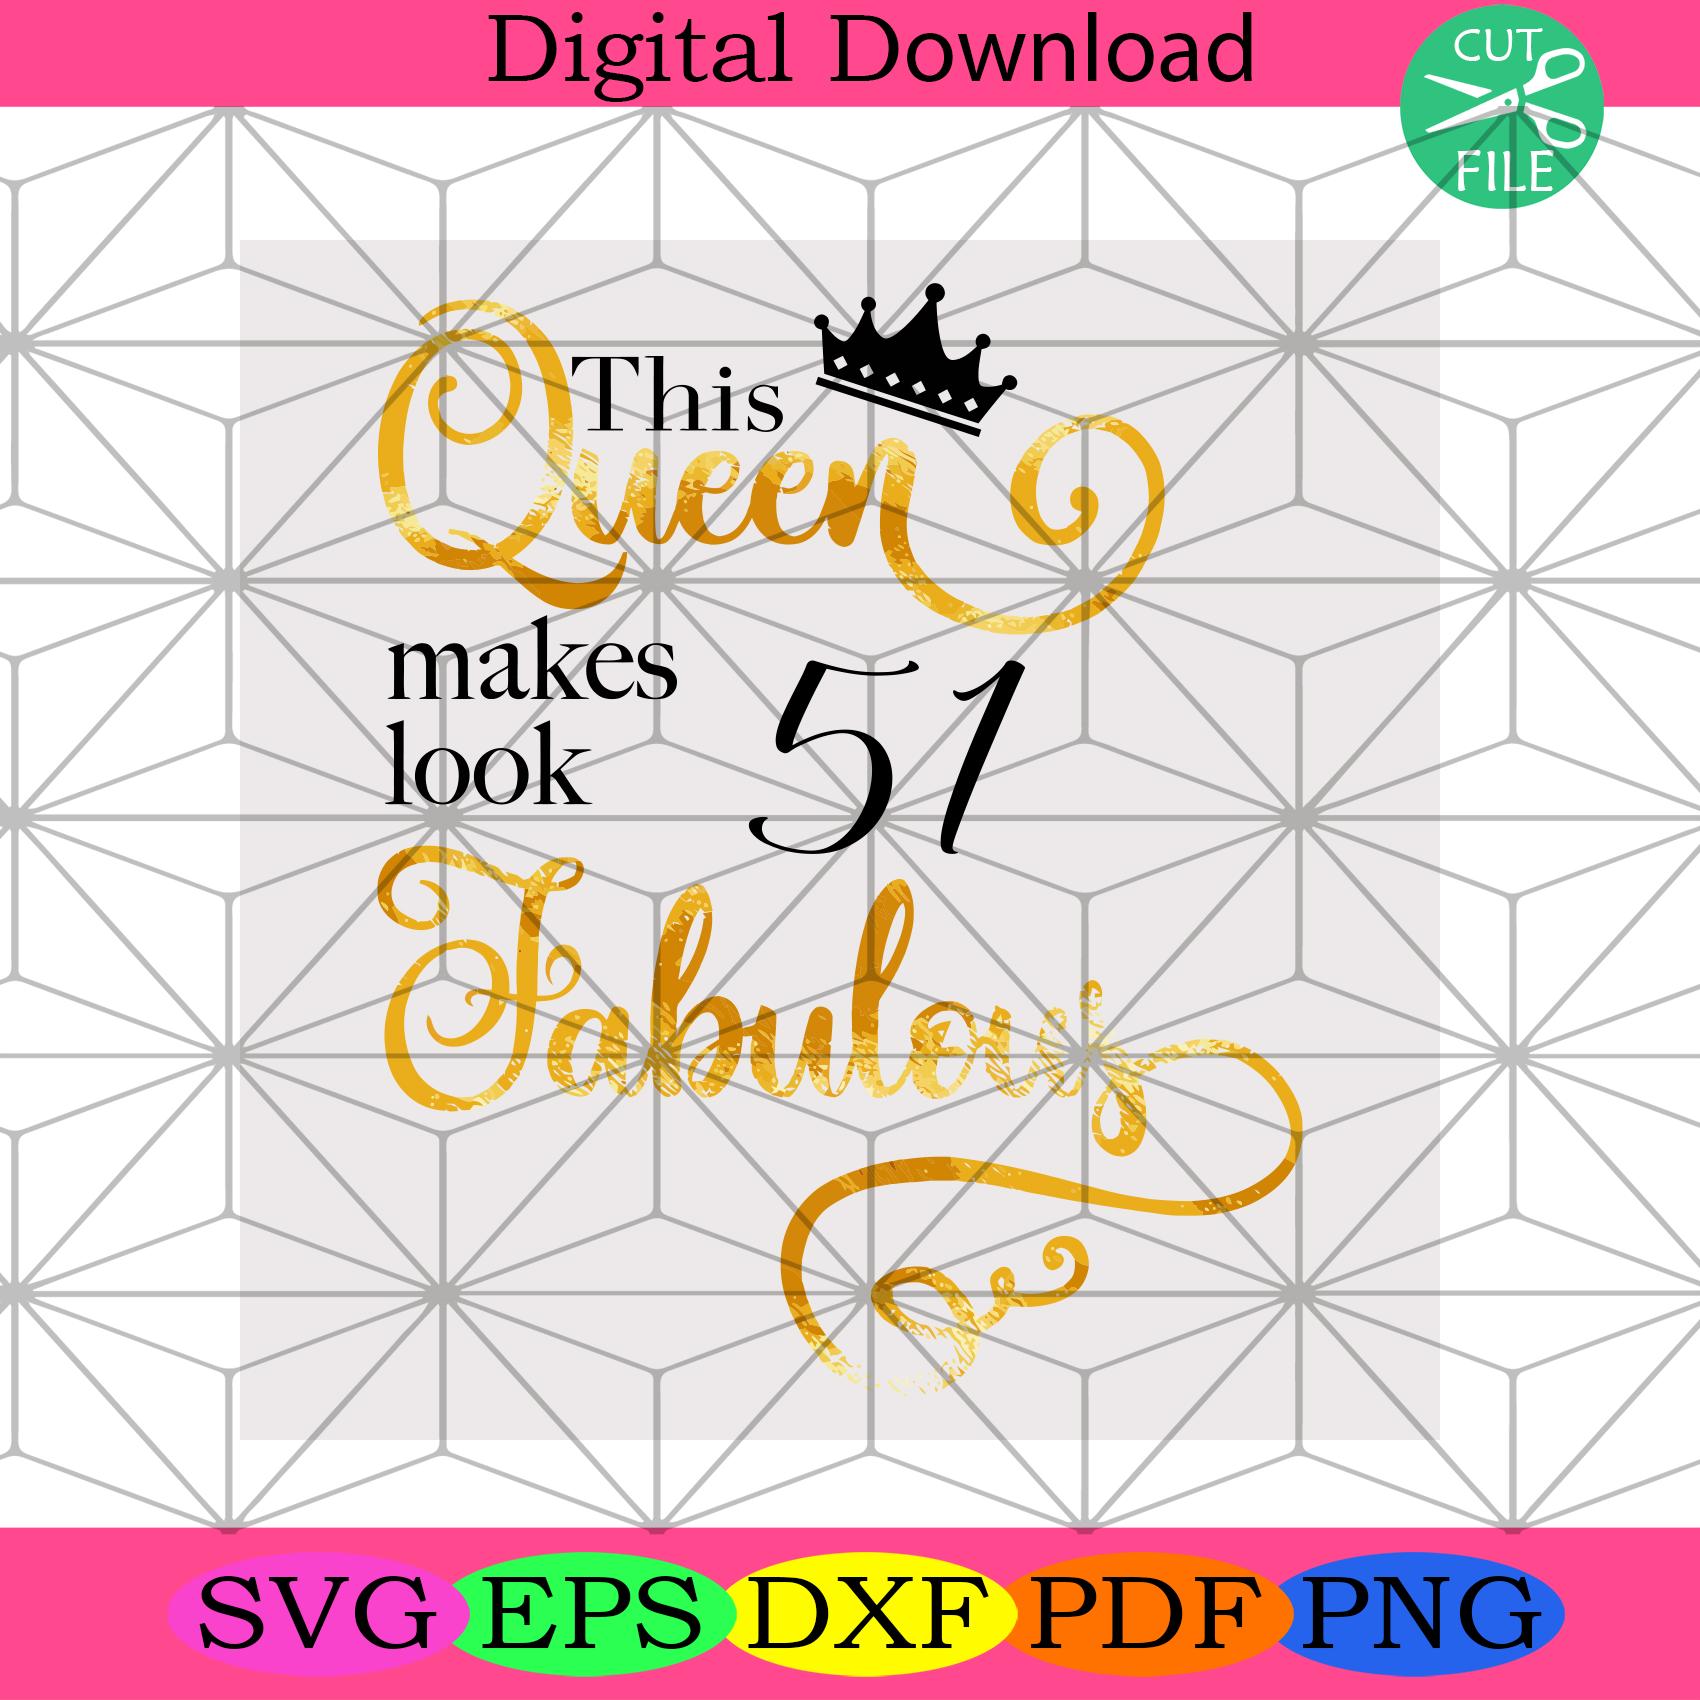 Download This Queen Makes Look 51 Fabulous Svg, Birthday Svg, Queen ...